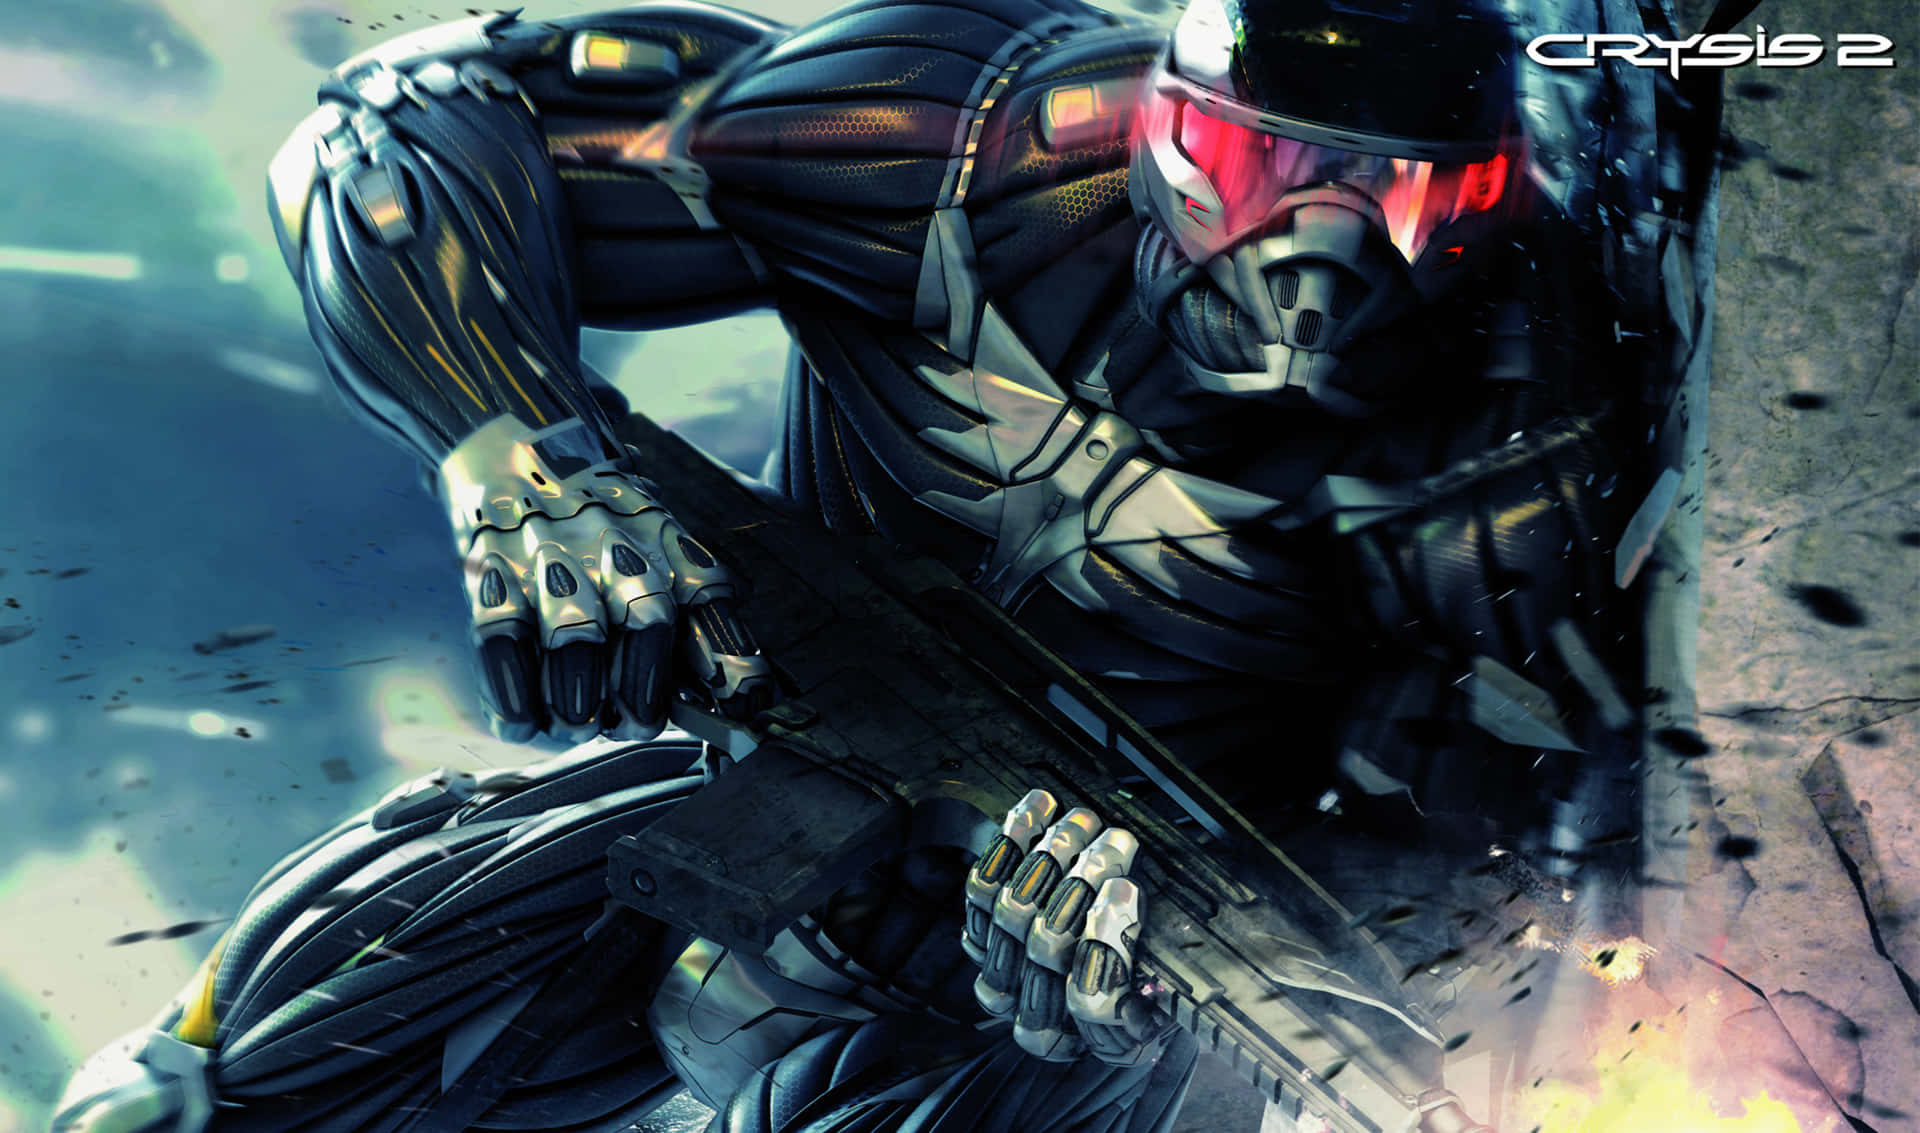 Prepare your soul for the ultimate Crysis 3 experience.